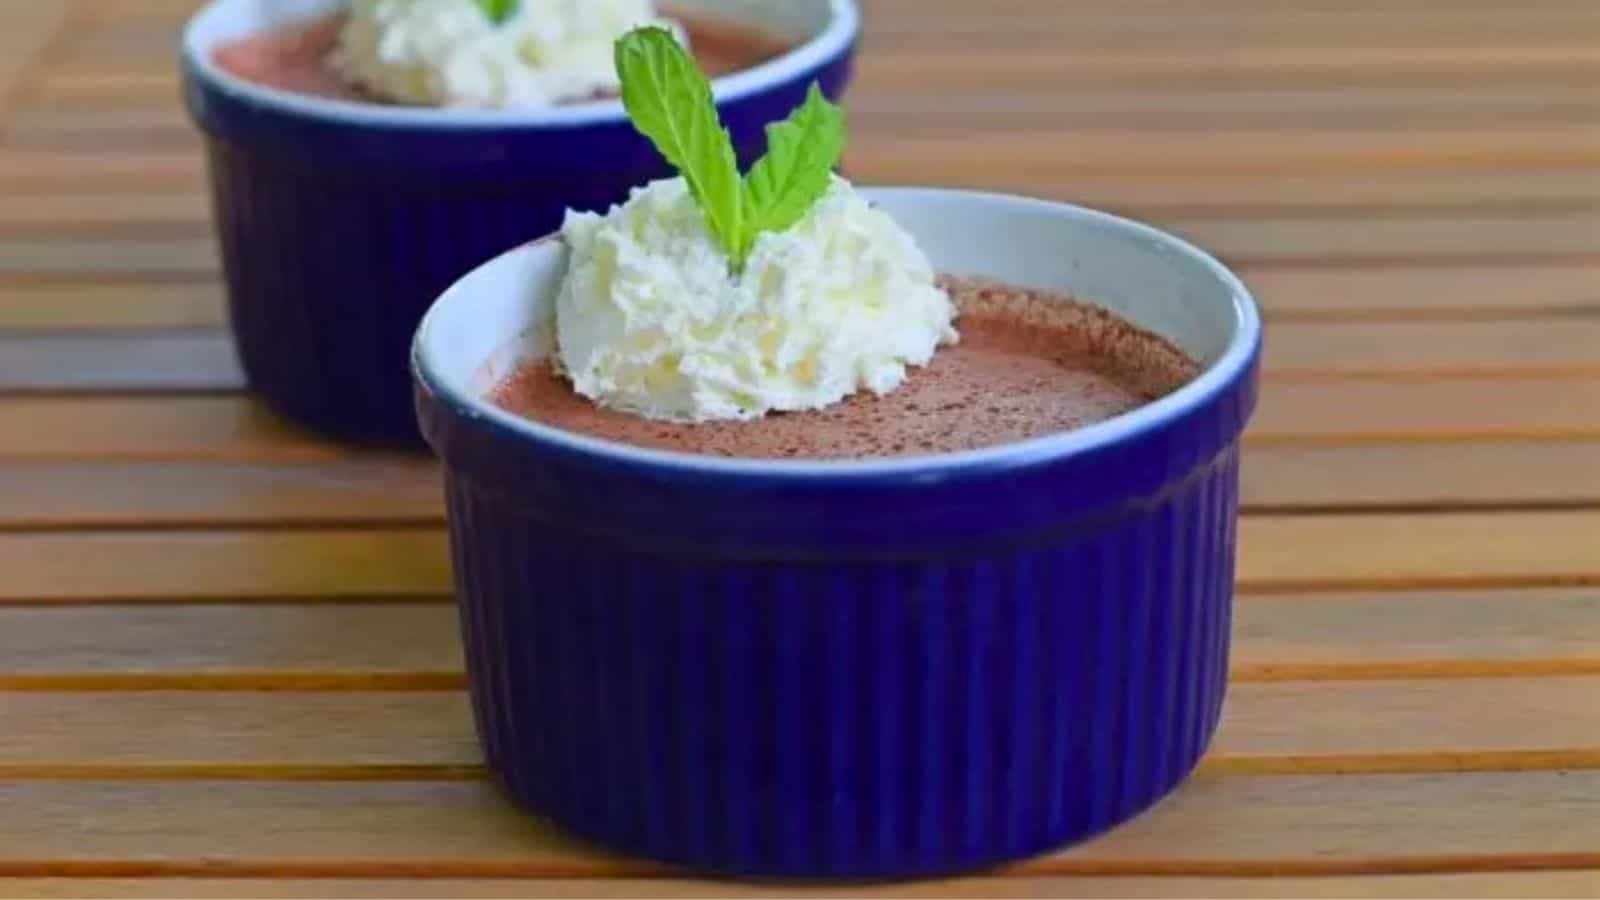 Image shows two Cherry Bavarian Custards in blue ramekins on a wooden table with whipped cream and a mint sprig.